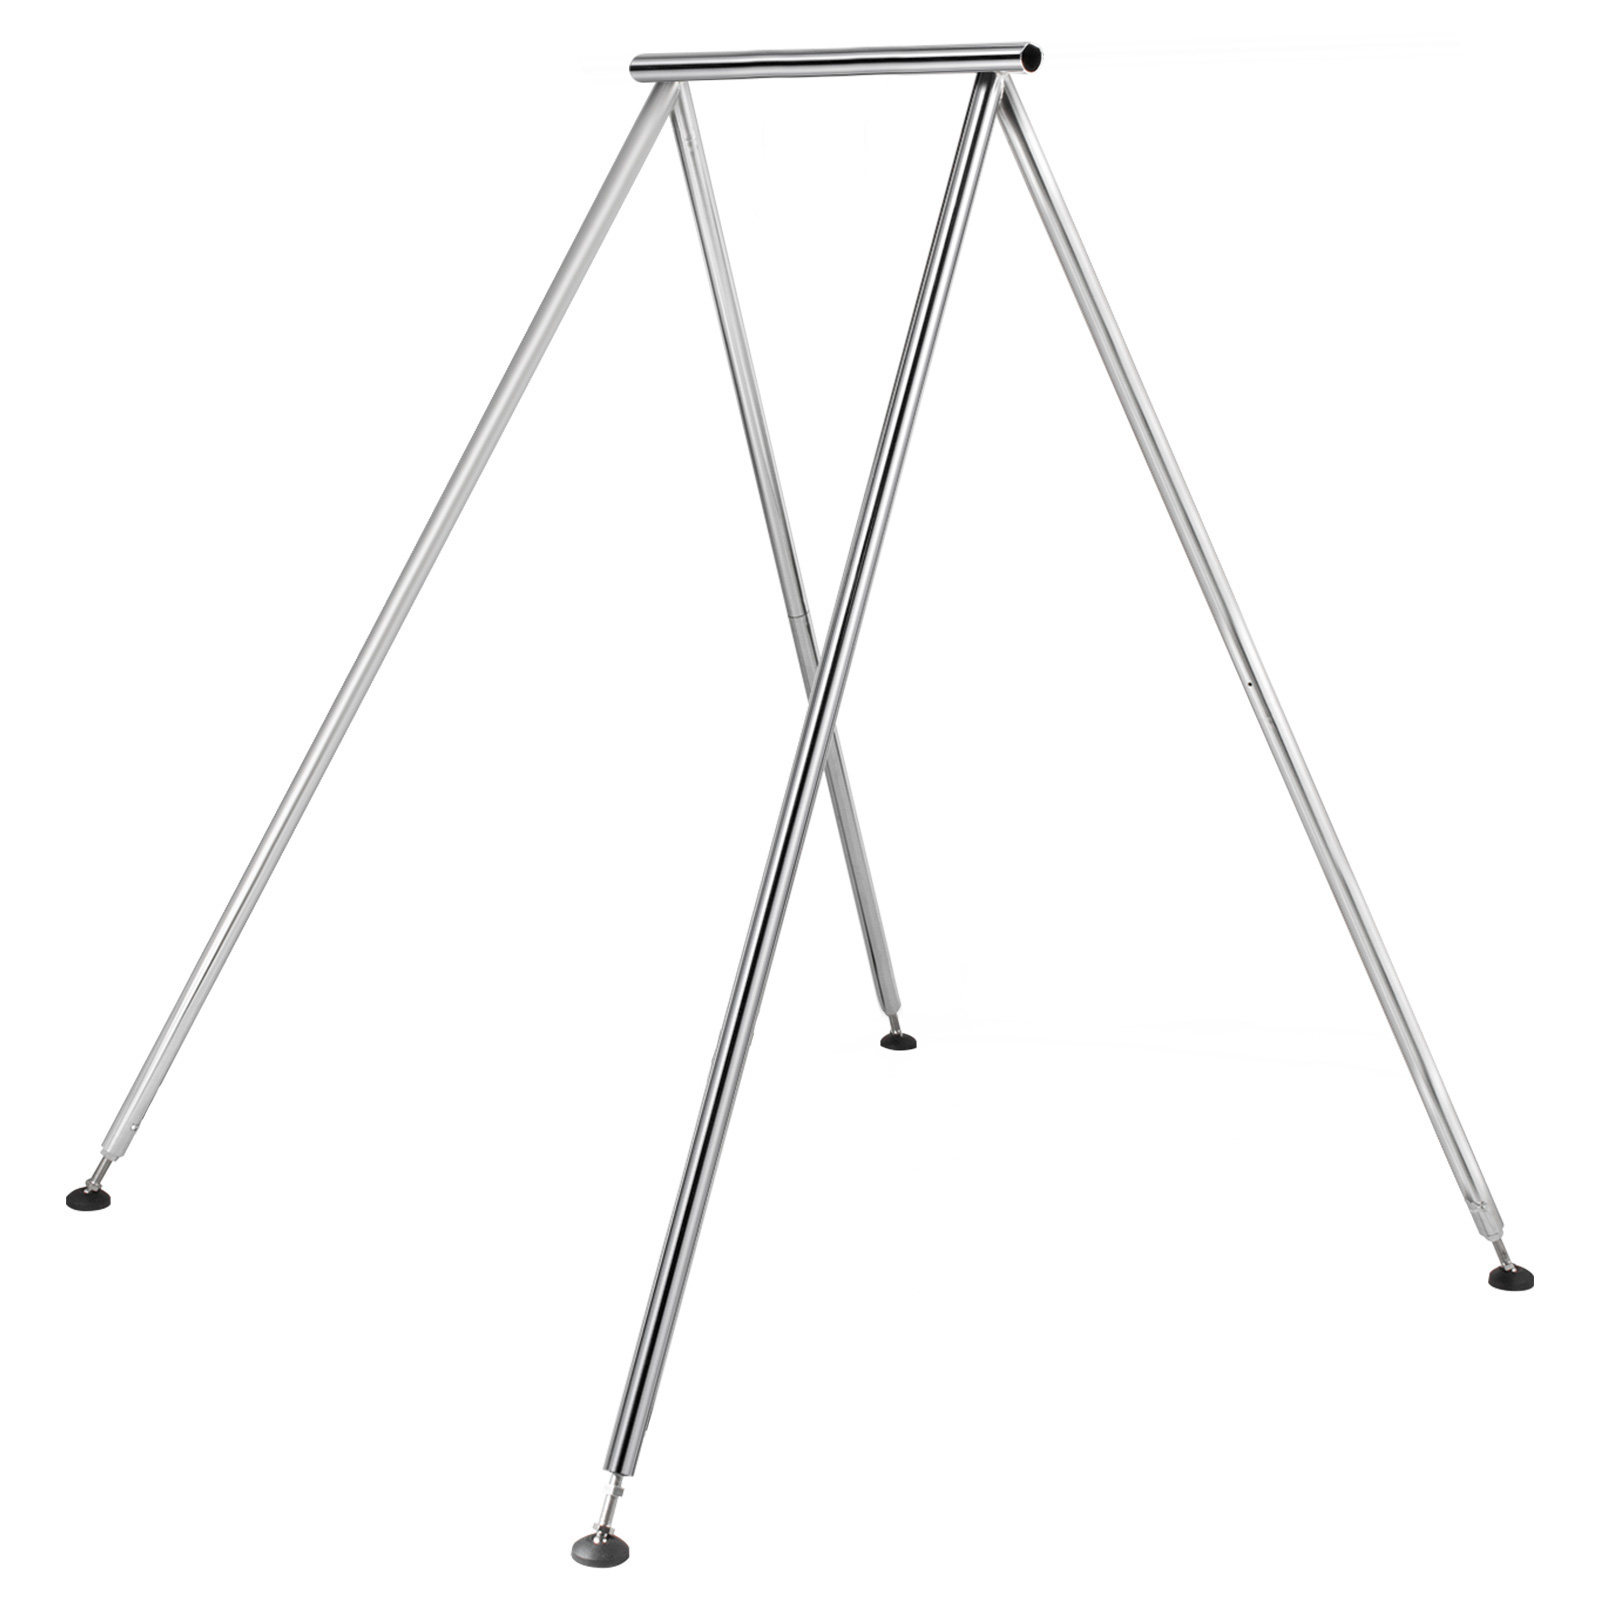 Aerial Swing Frame - Steel Freestanding Yoga Stand Support up to 550 LBs -  Perfect Fitness Equipment Stand for Hooks, Hammocks, Silk, Lyra, Punching